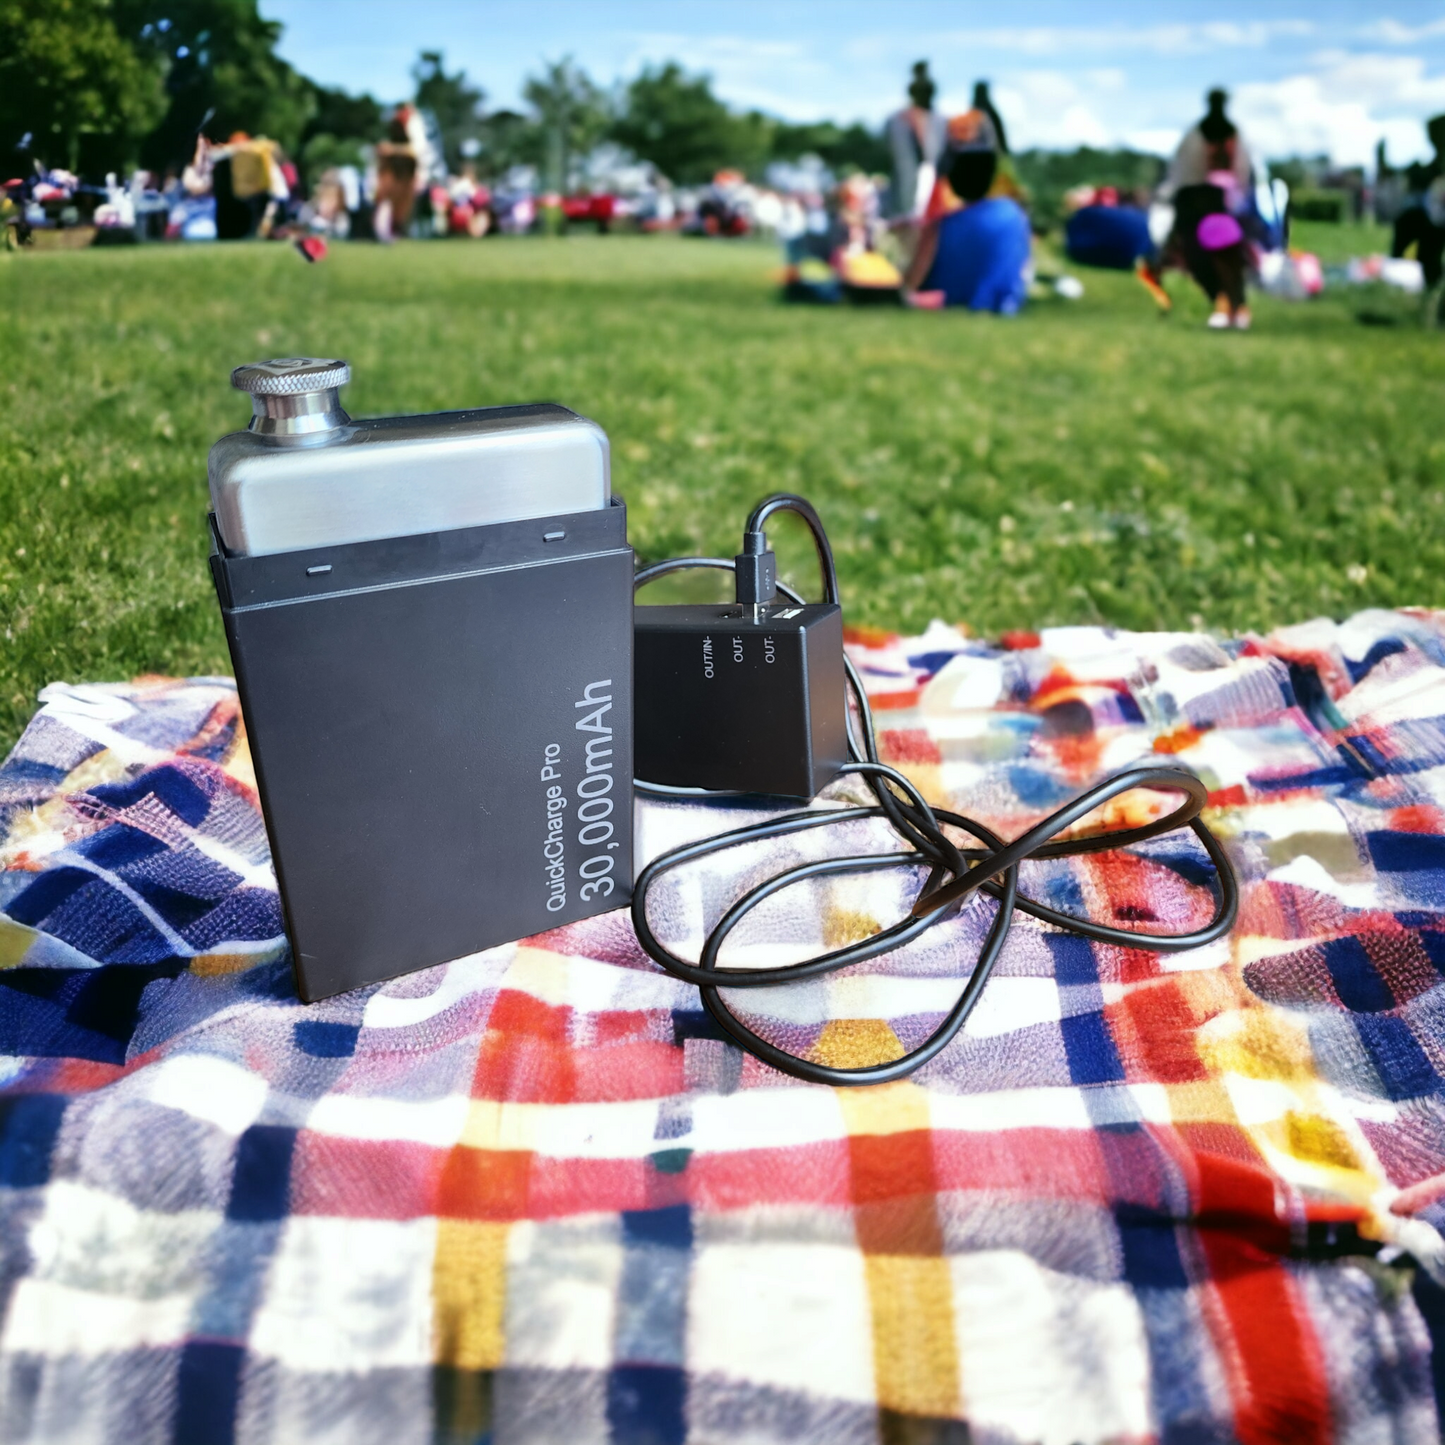 Invisaflask - Discreet Power Bank Flask